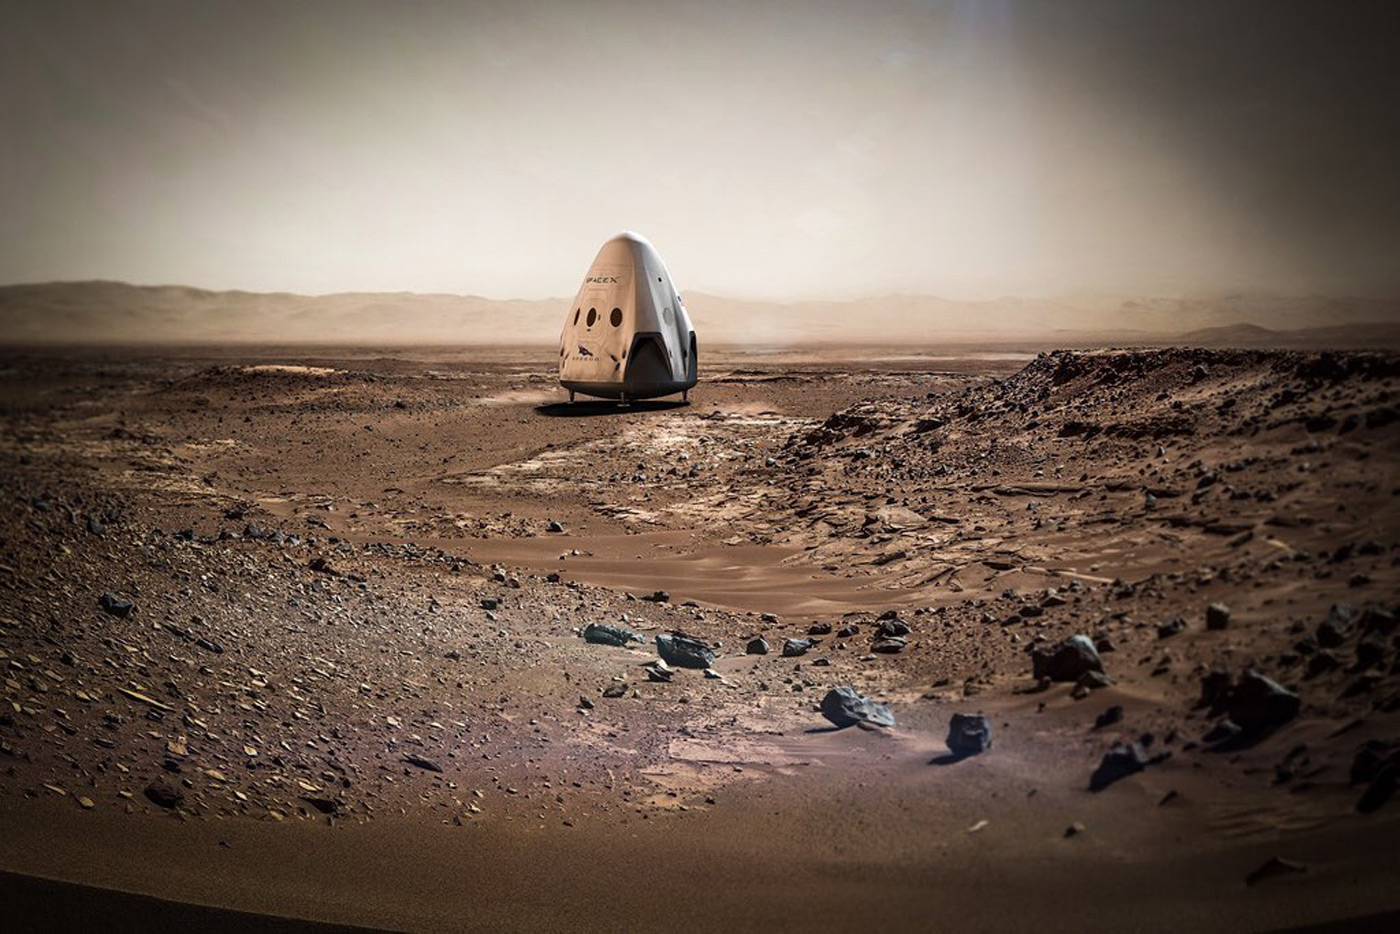 SpaceX wants to land on Mars as early as 2018